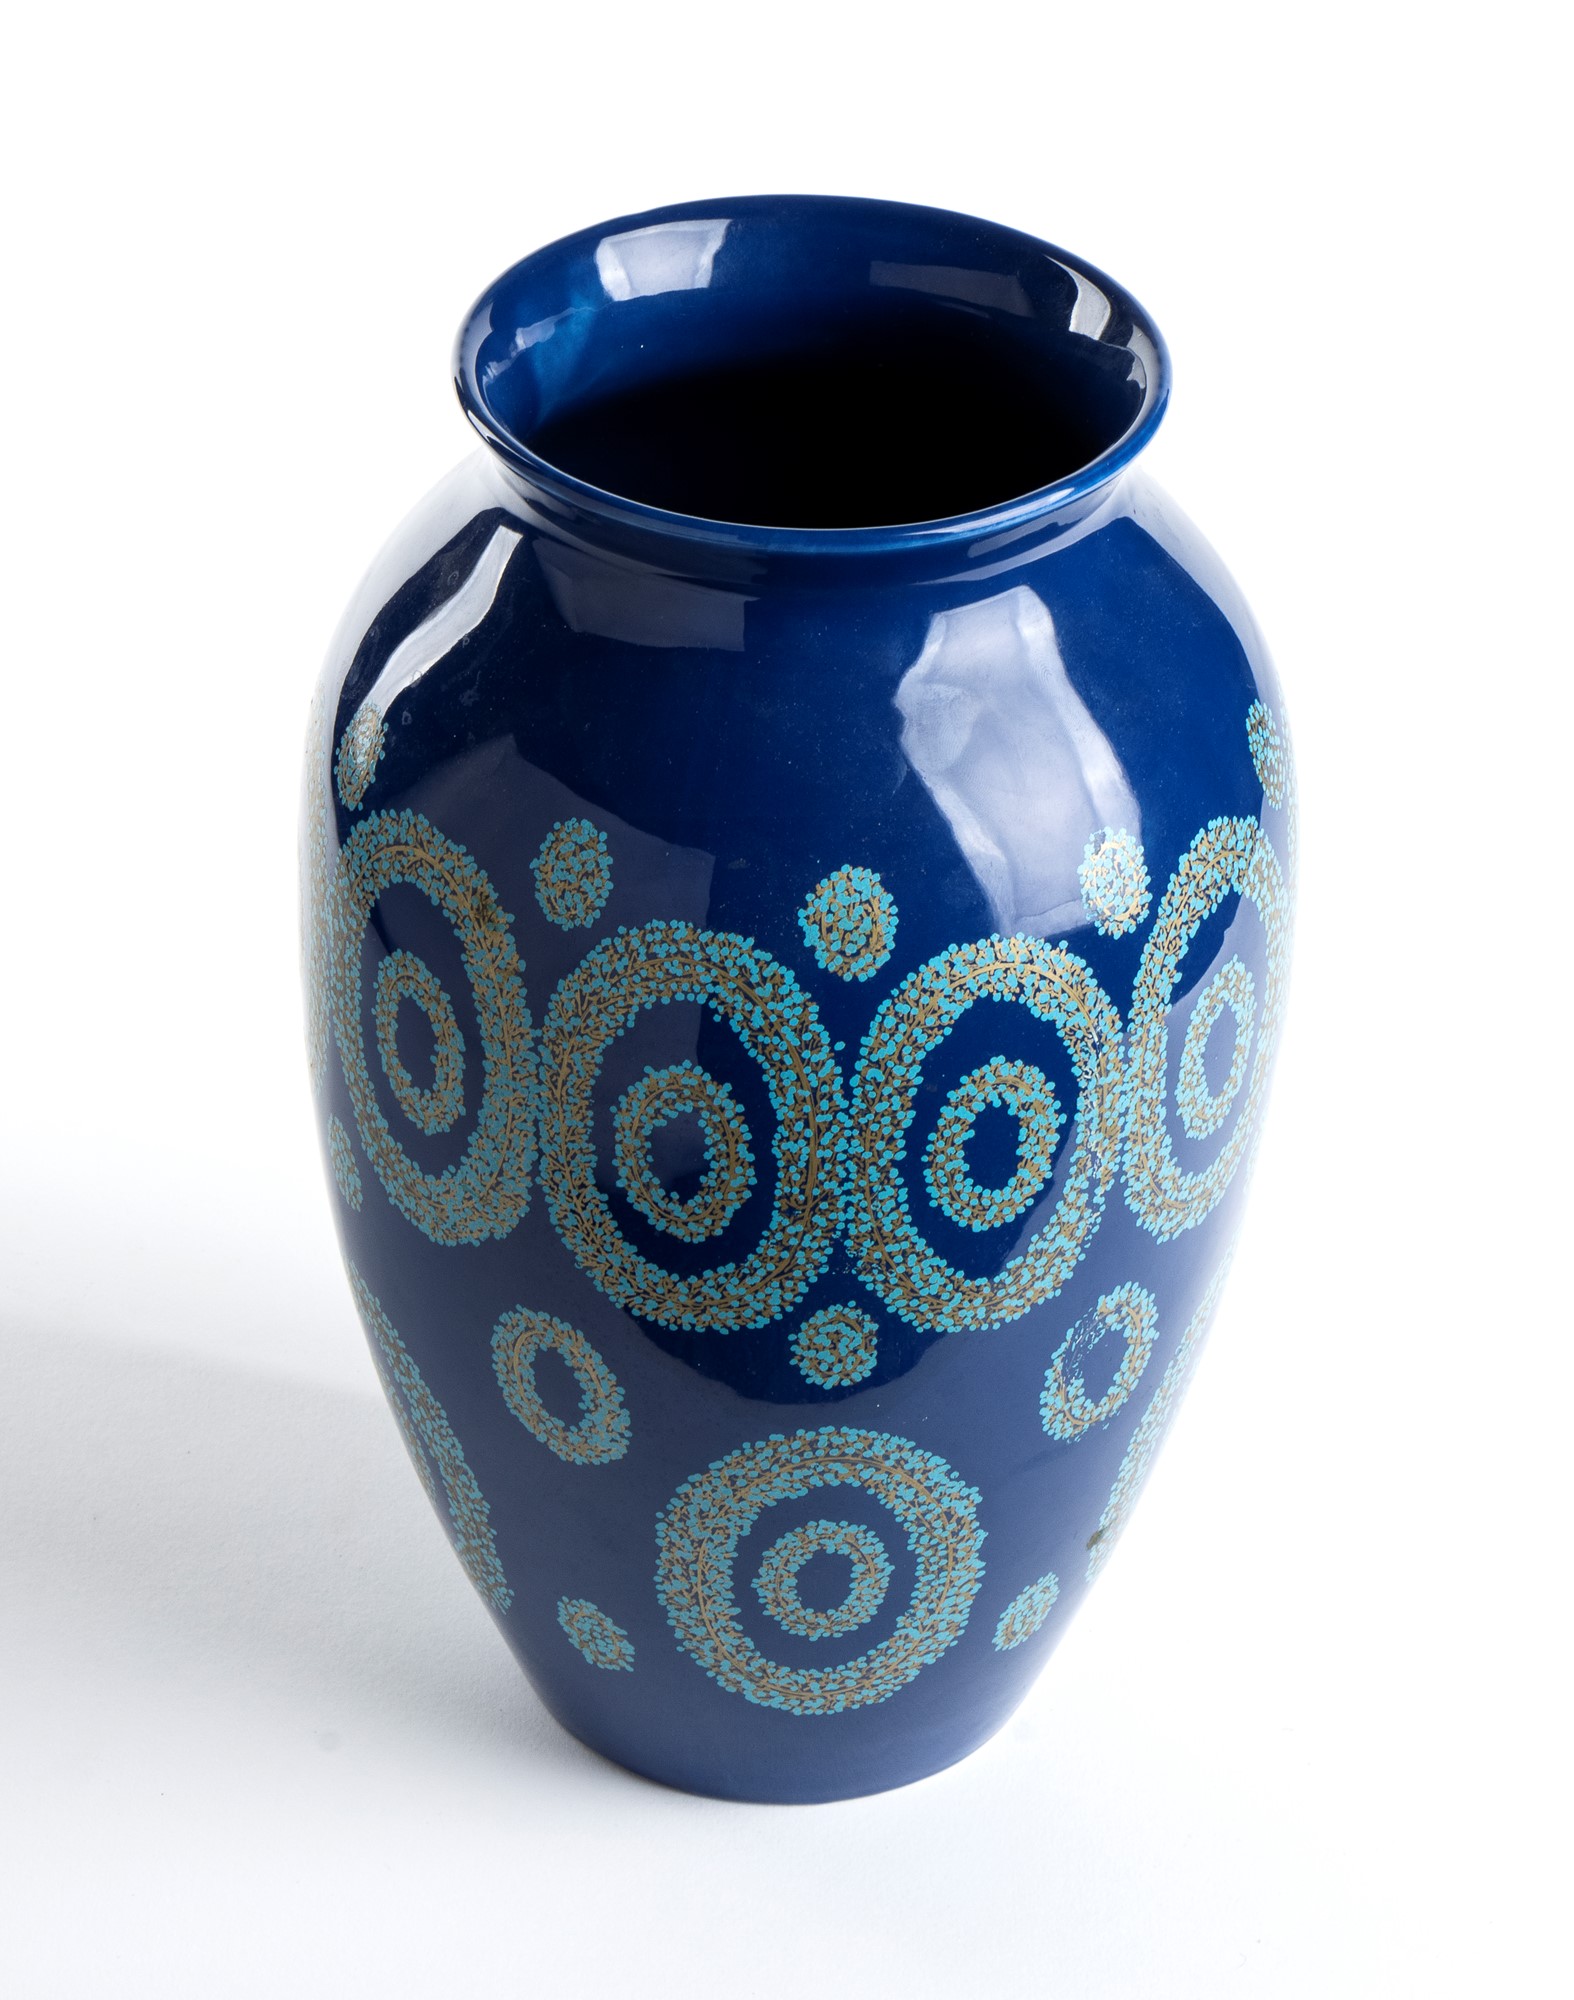 Blue ceramic vase with special celestial decorations and gold highlights - Image 5 of 11